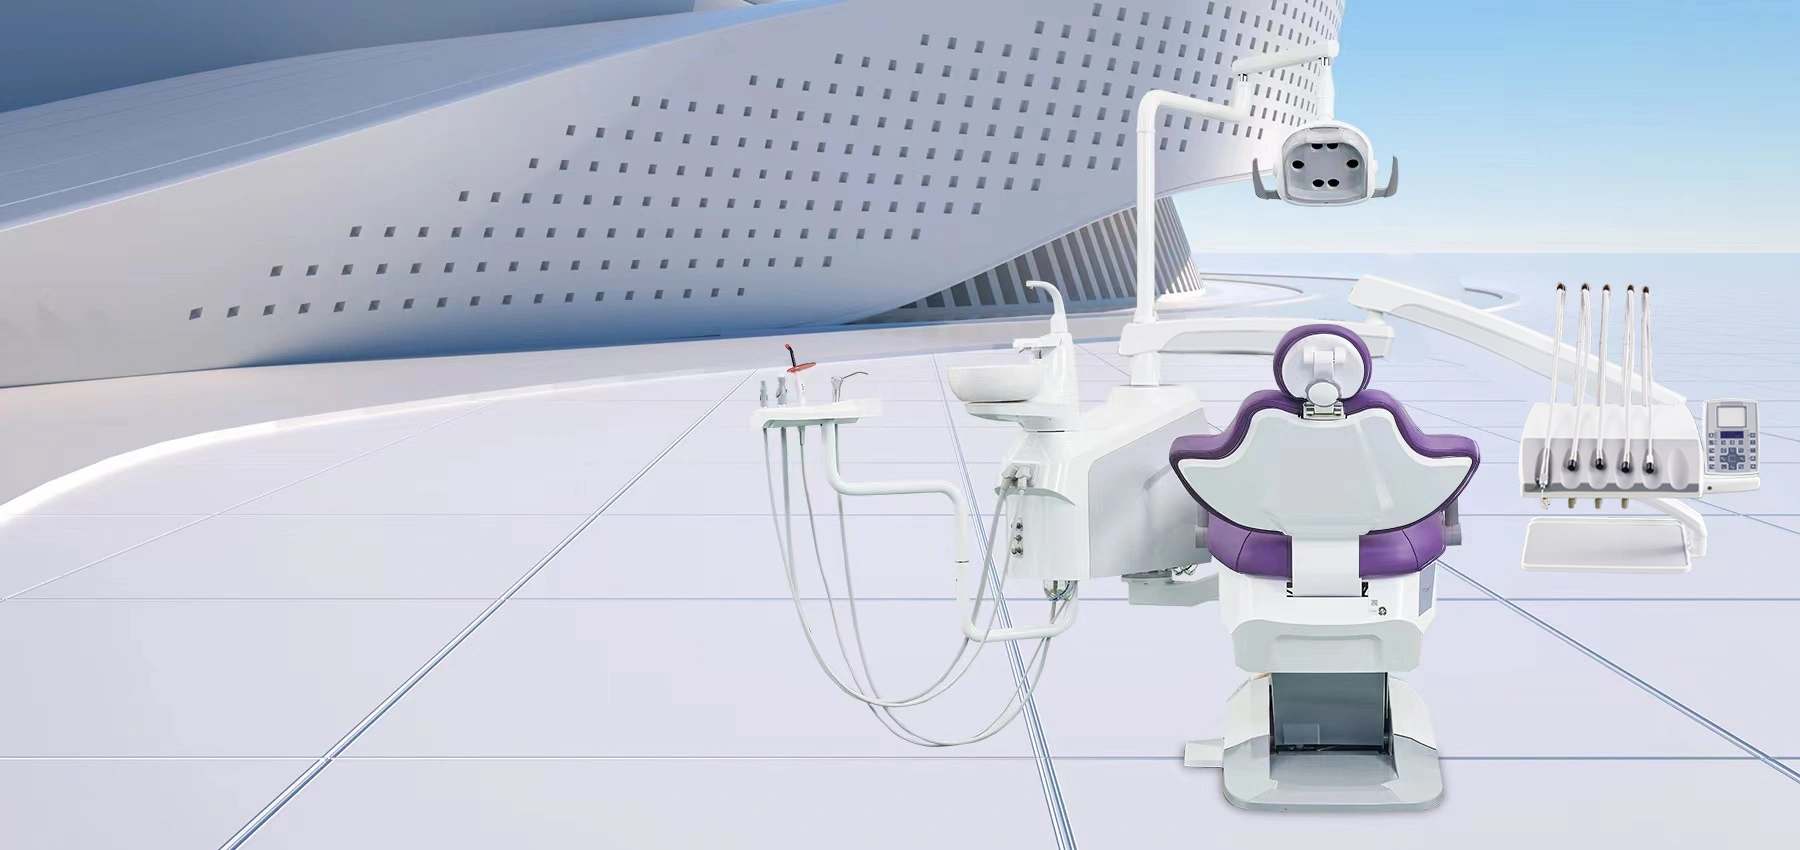 Unique Design Dental Chair with AI Intelligence, Empowering dentists' work efficency